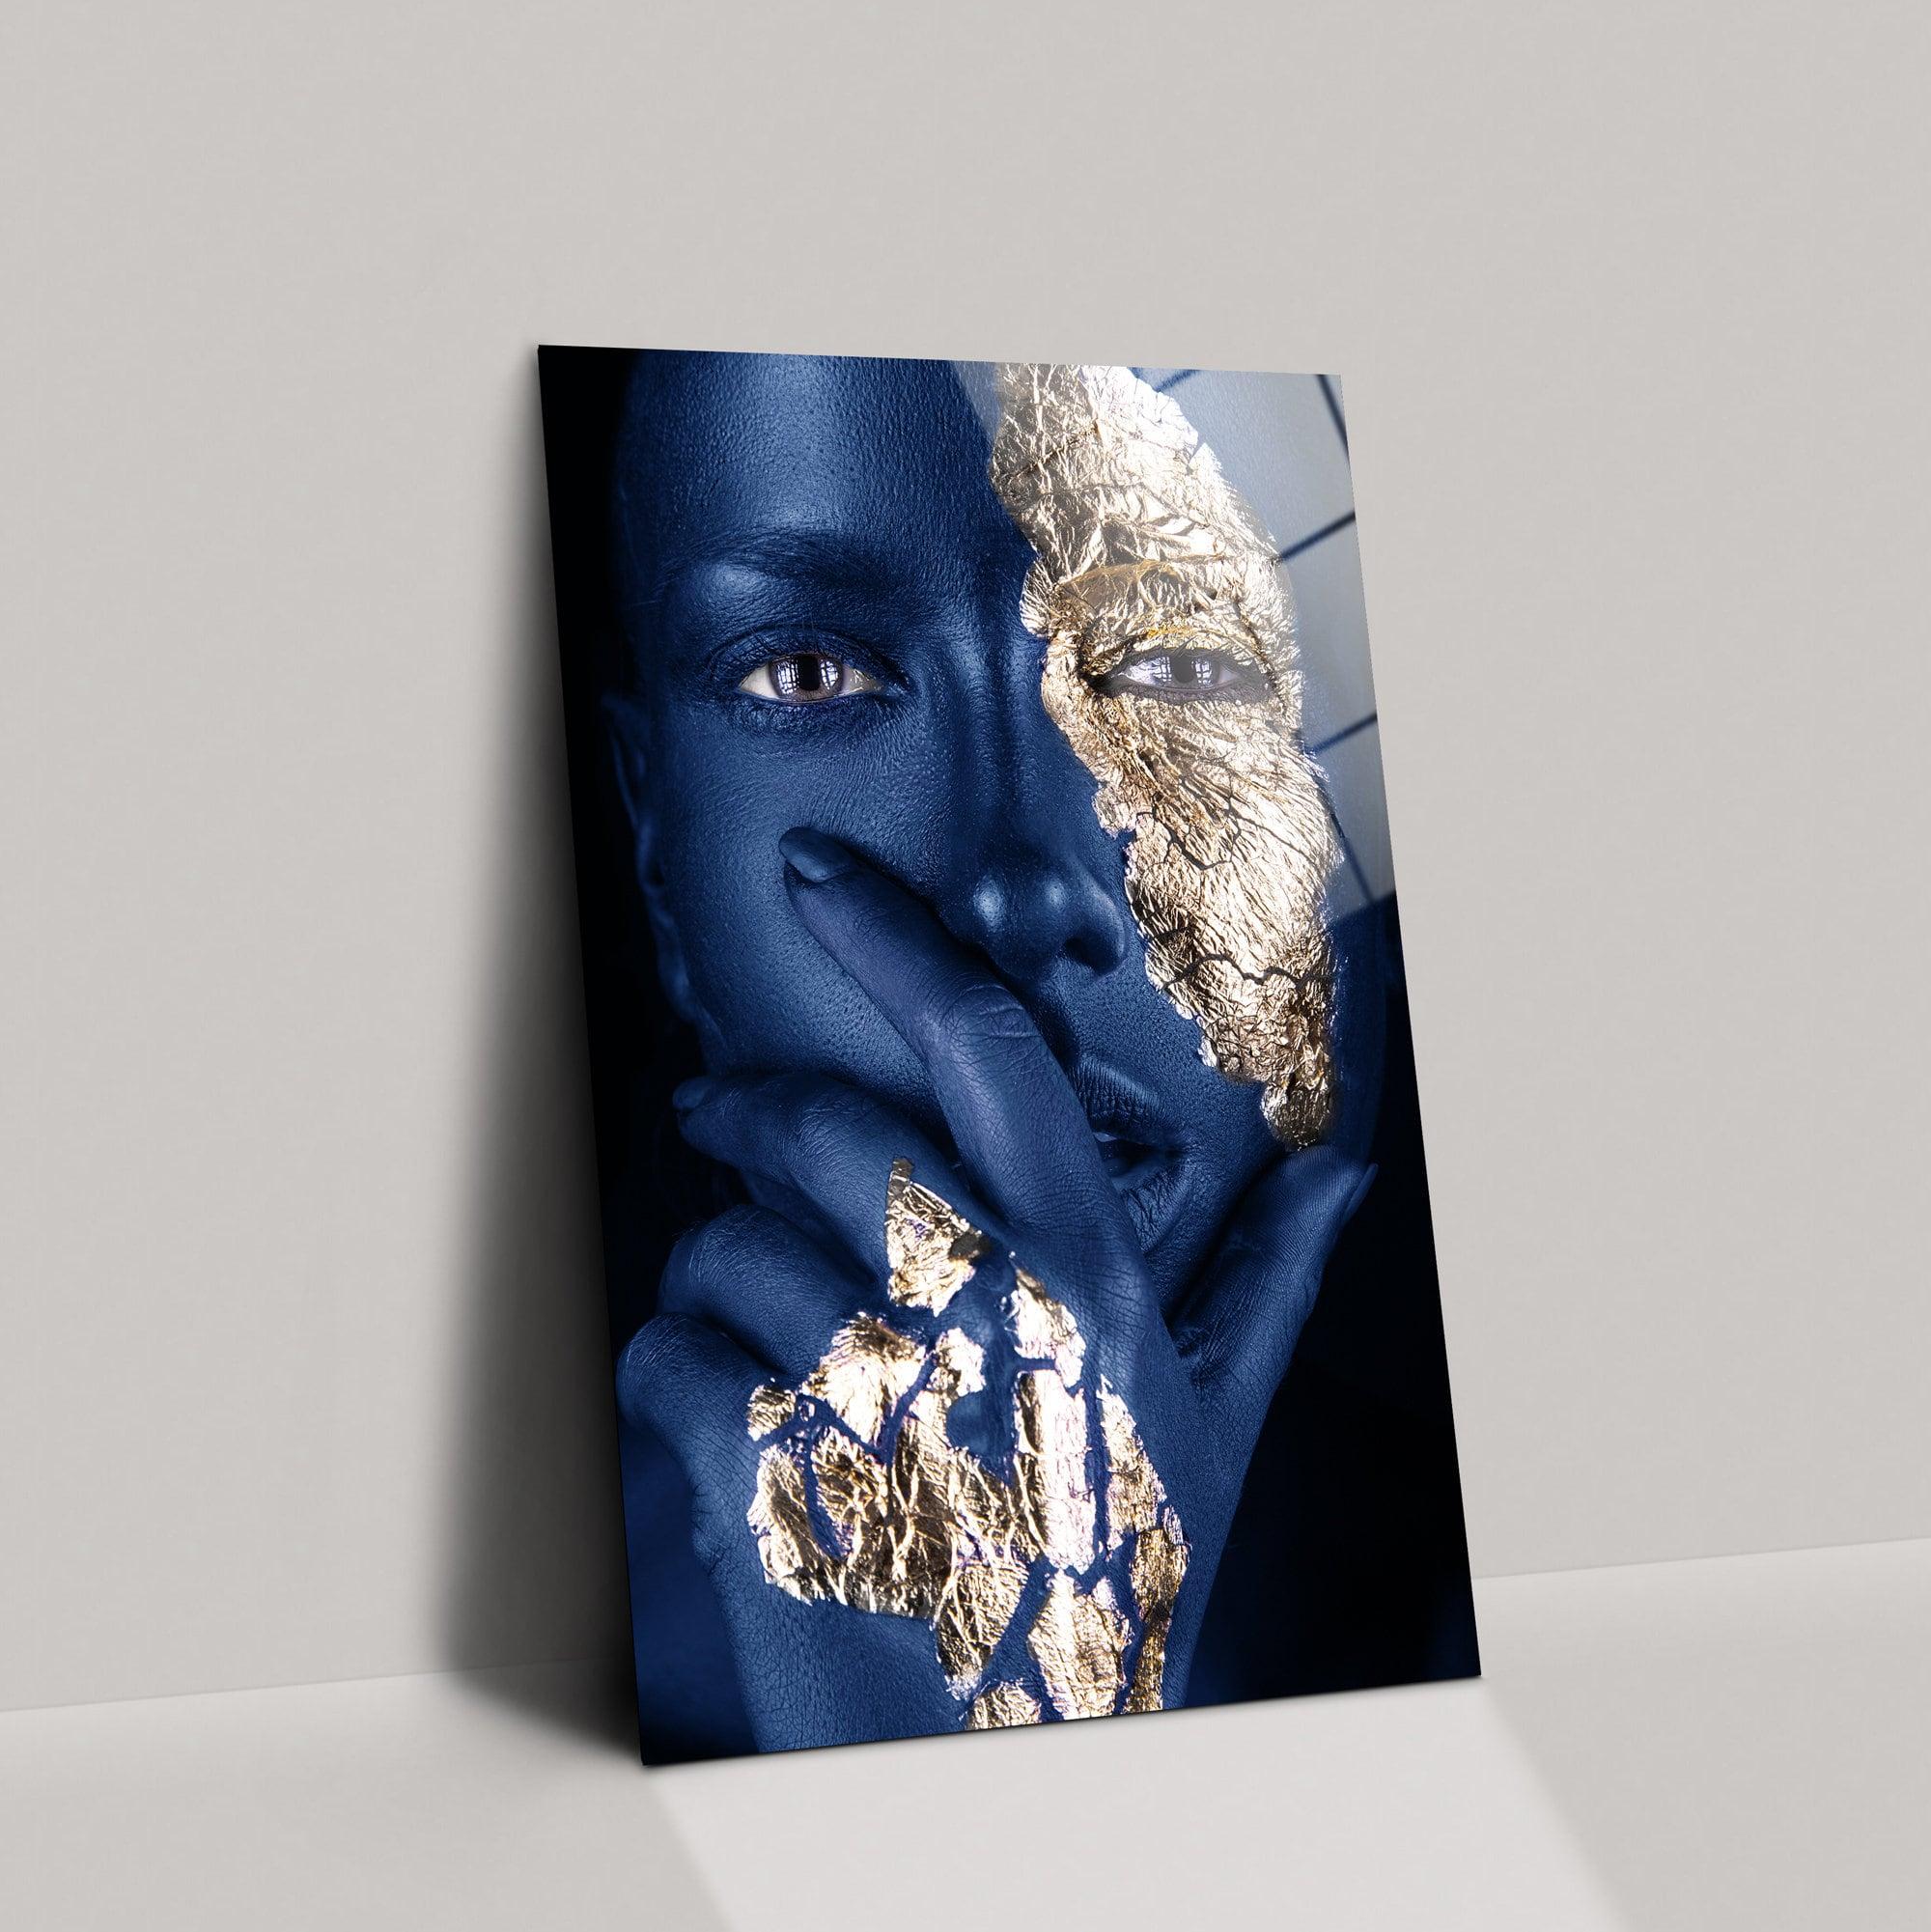 Modern Black Woman glass Wall Art| Poster And Prints Pictures canvas, Home Decoration, African Woman Print on glass, African Woman glass art